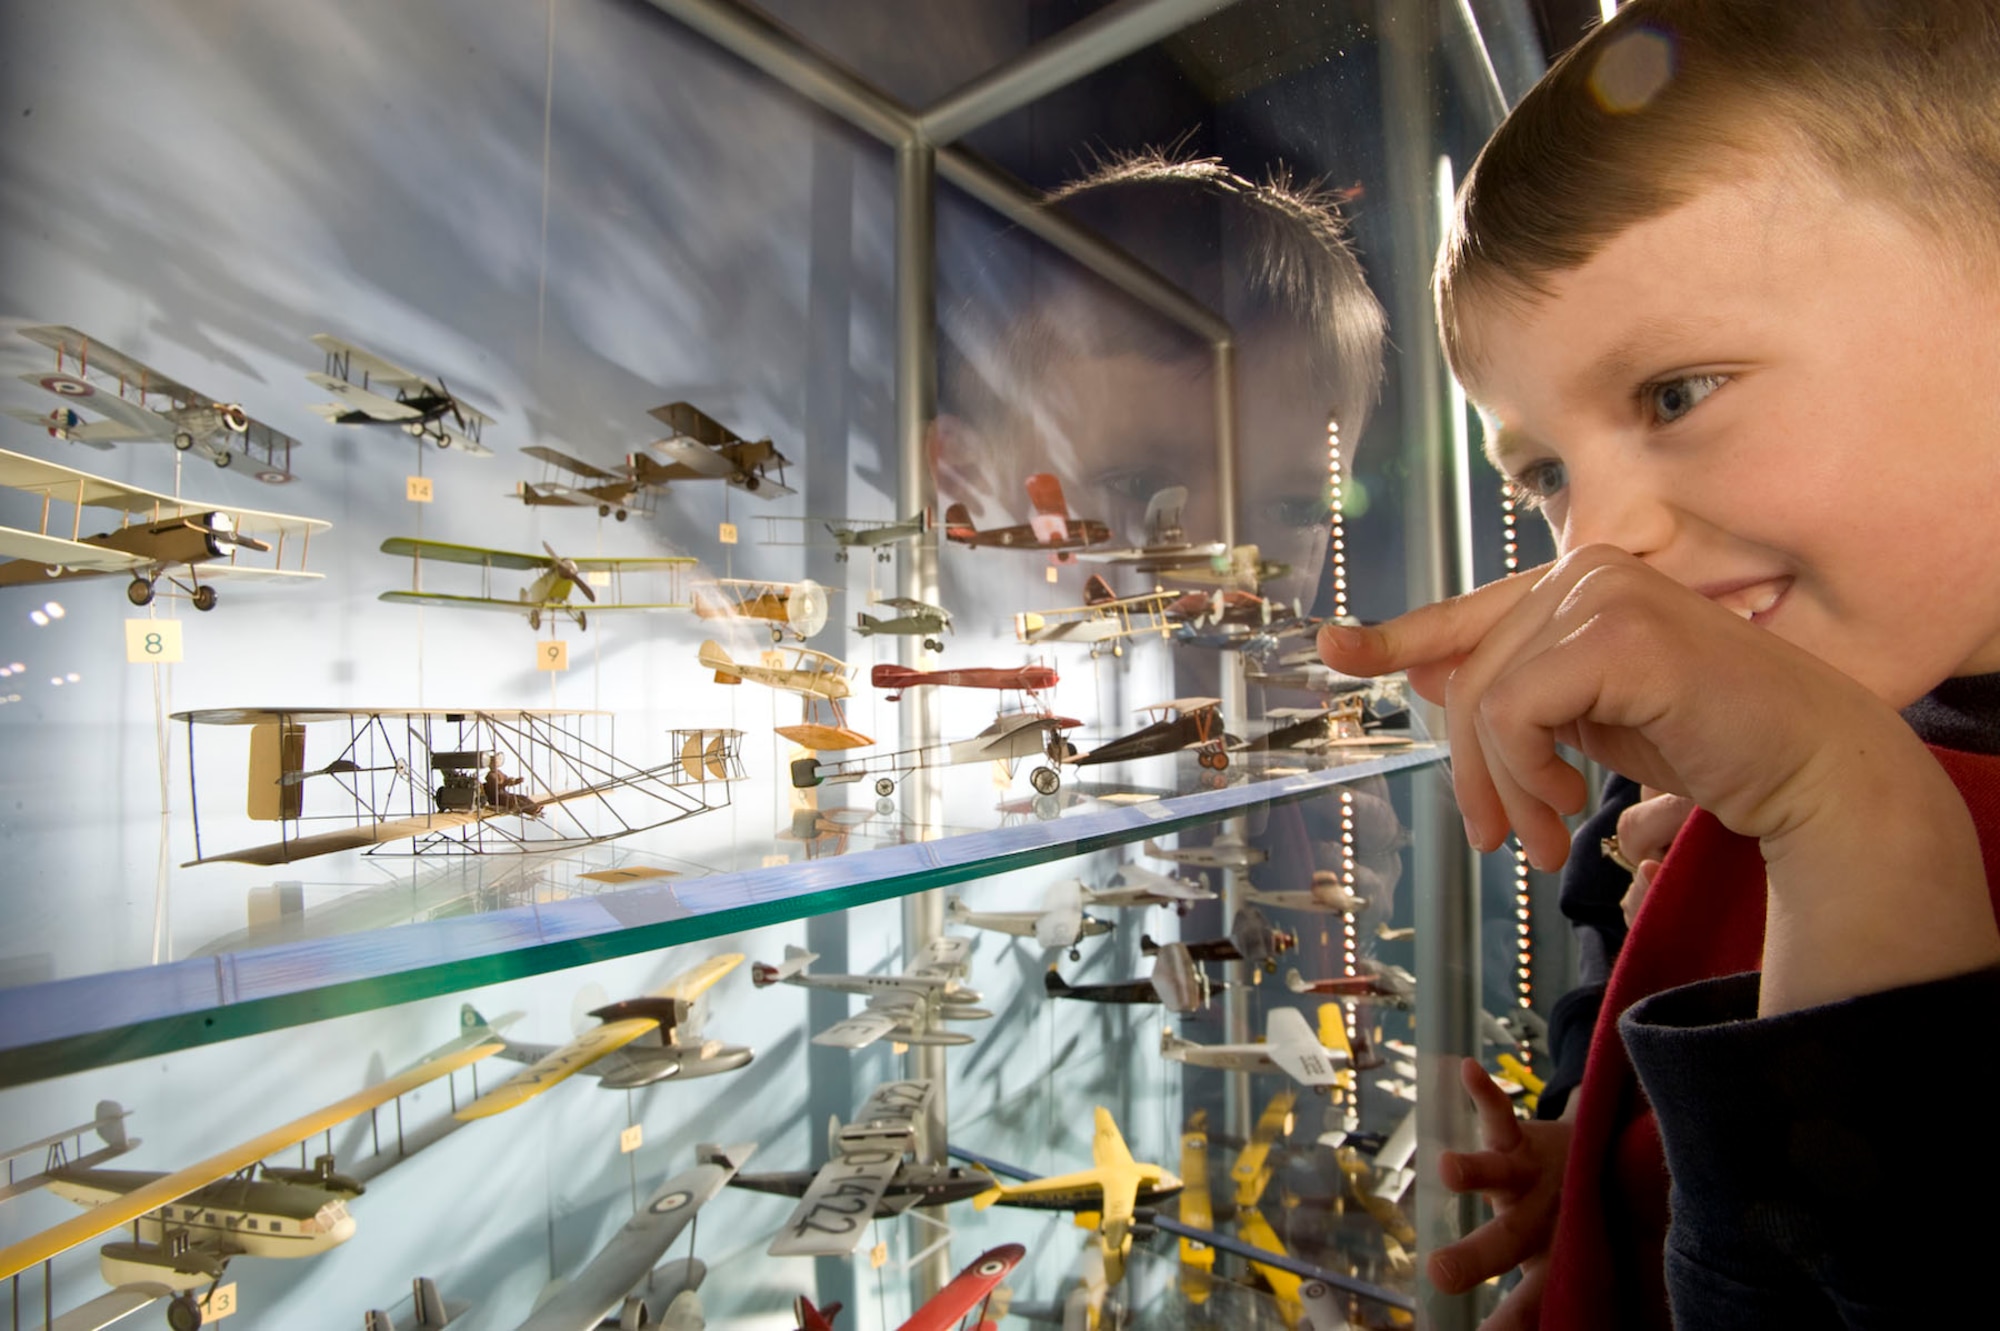 DAYTON, Ohio -- Eugene W. Kettering Model Aircraft Collection on display at the National Museum of the U.S. Air Force. (Air Force Museum Foundation photo by Dan Patterson)